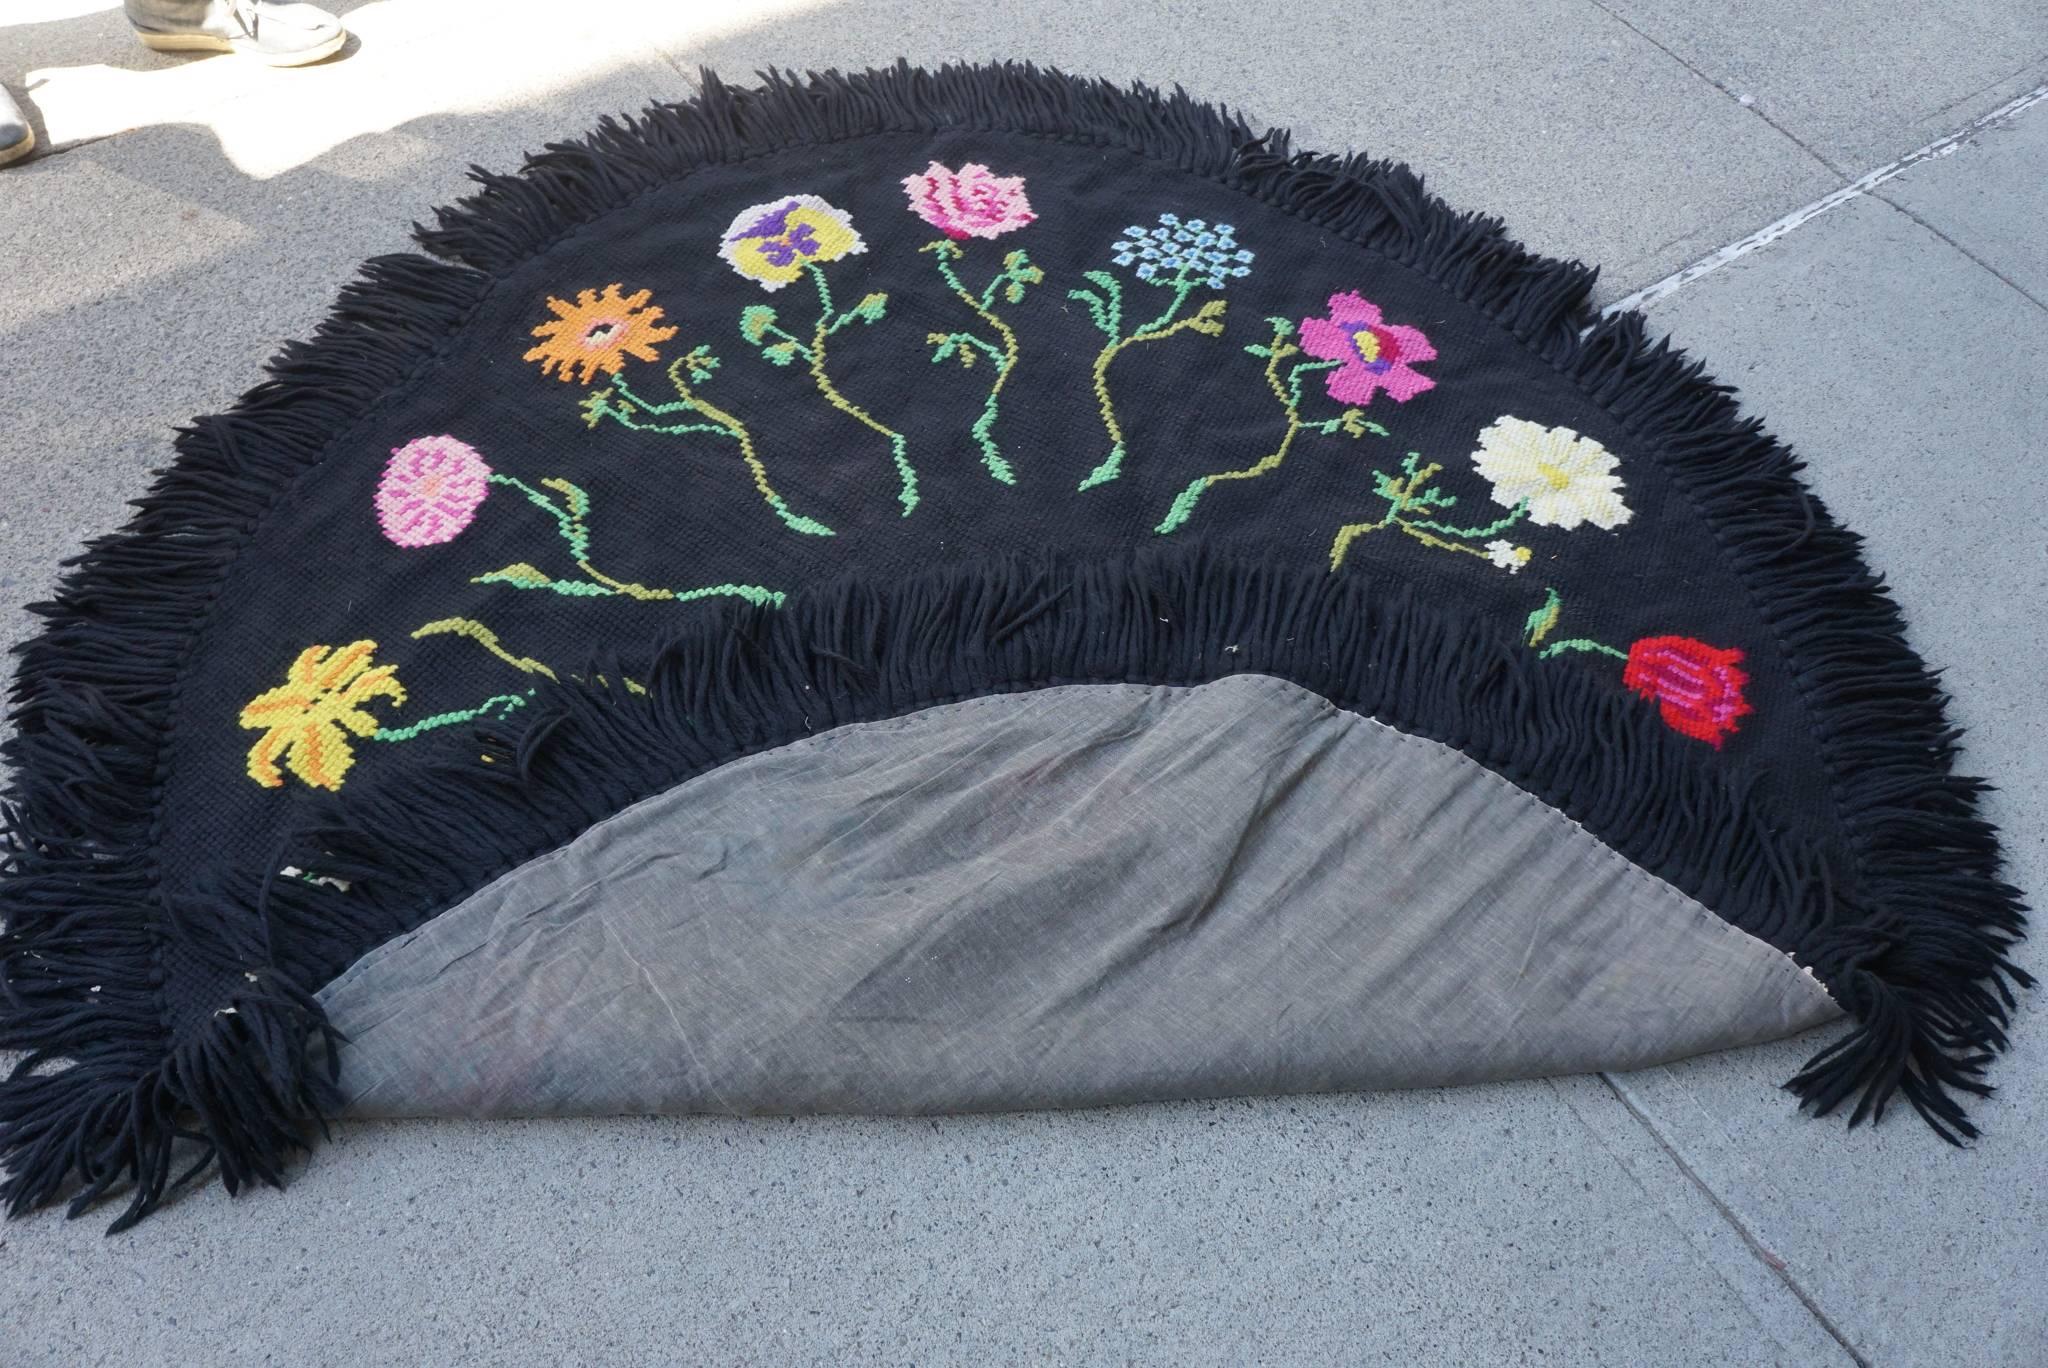 Vintage Hooked Yarn Rug from the Estate of Bunny Mellon 2